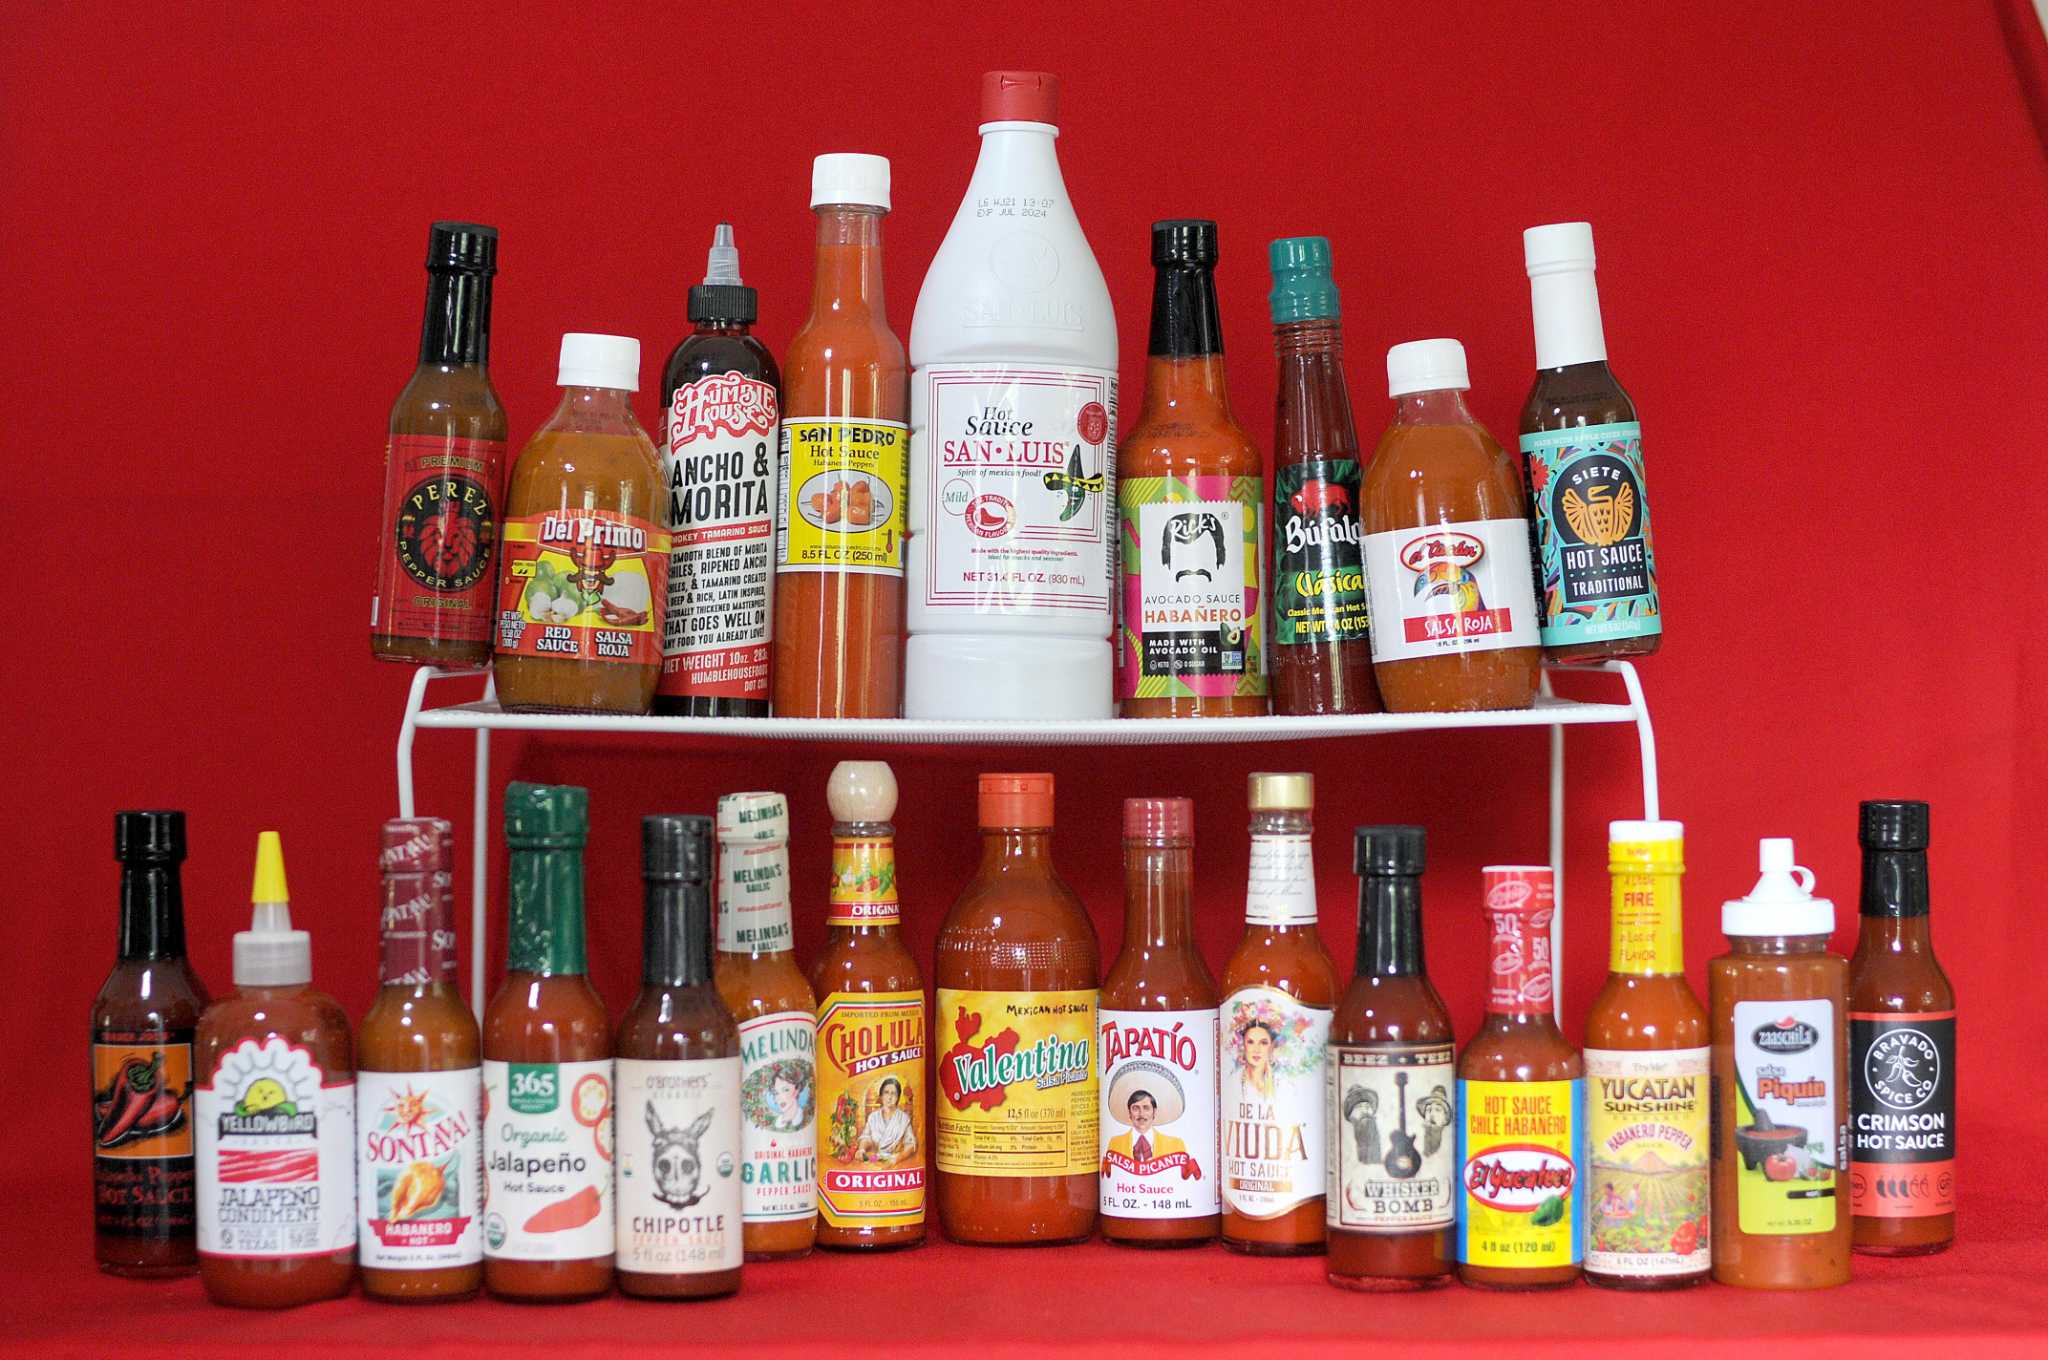 The 10 best Mexican-style hot sauces from grocery stores and what foods